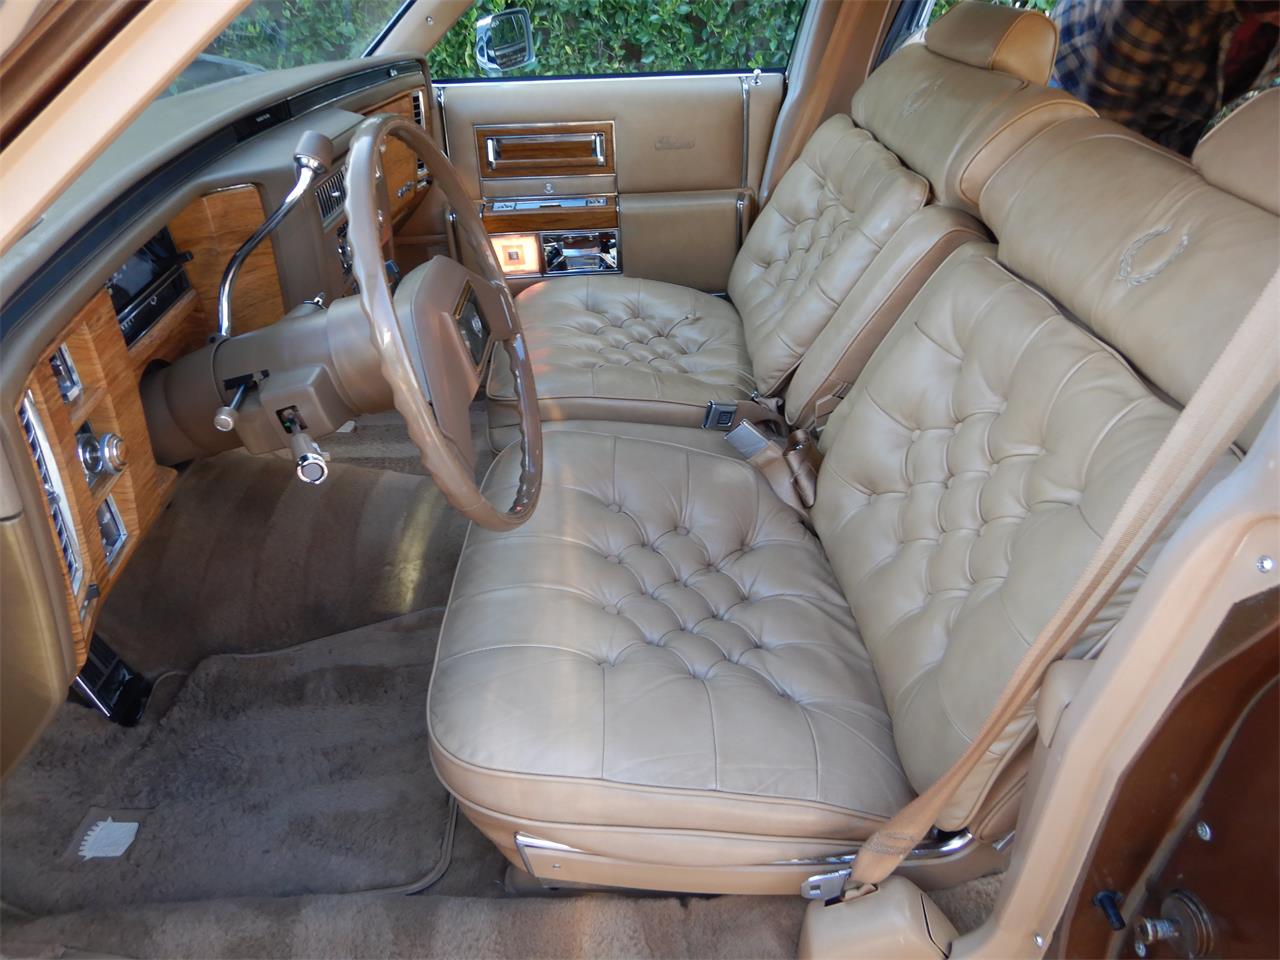 1981 Cadillac Fleetwood Brougham for sale in Woodland Hills, CA – photo 73